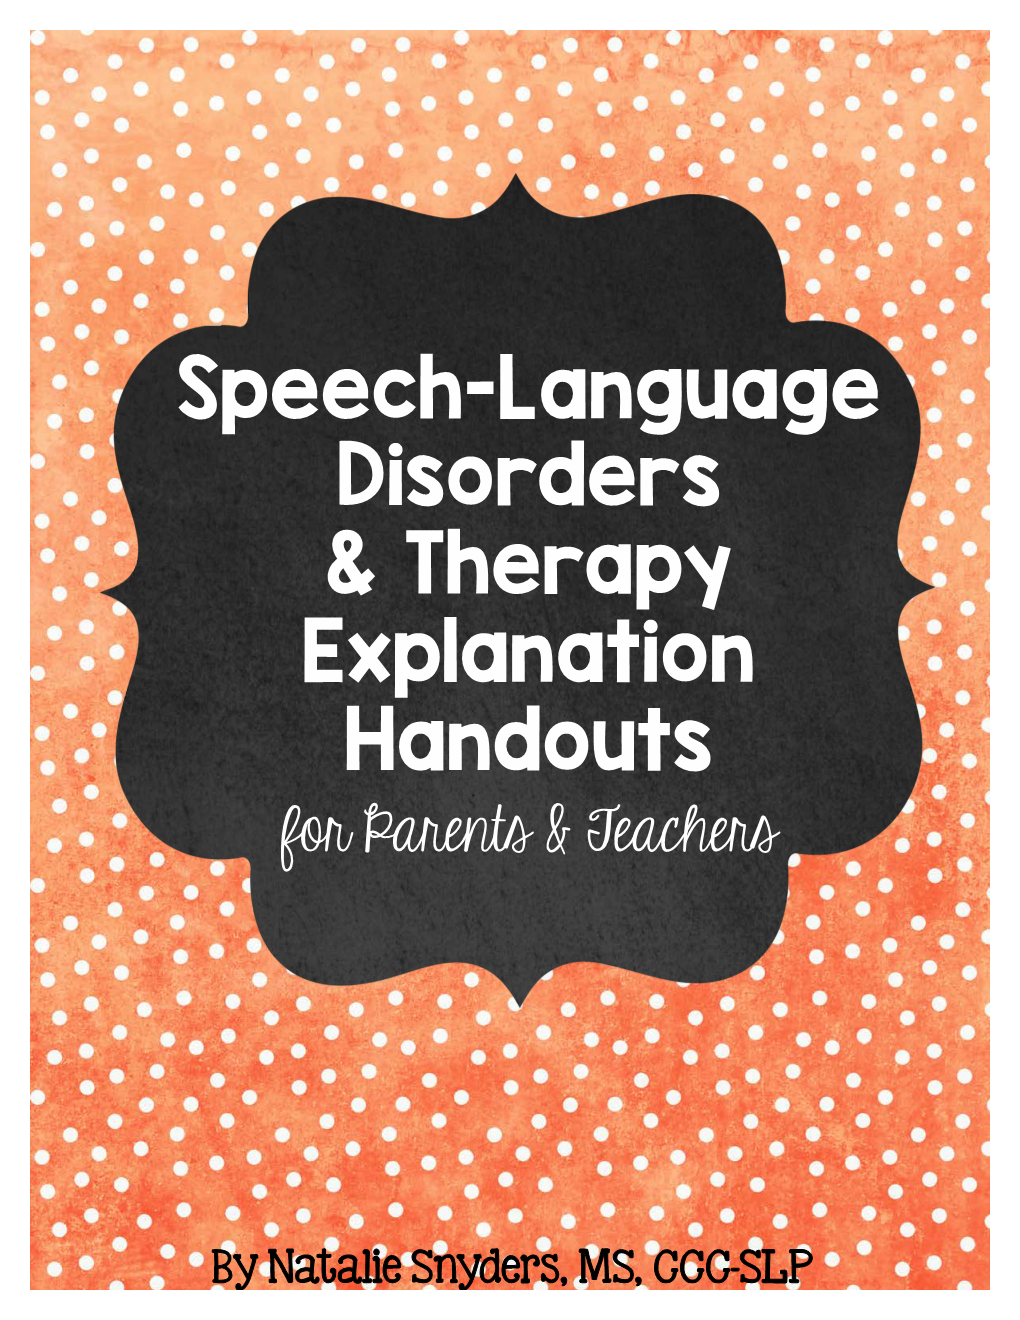 Speech-Language Disorders & Therapy Explanation Handouts